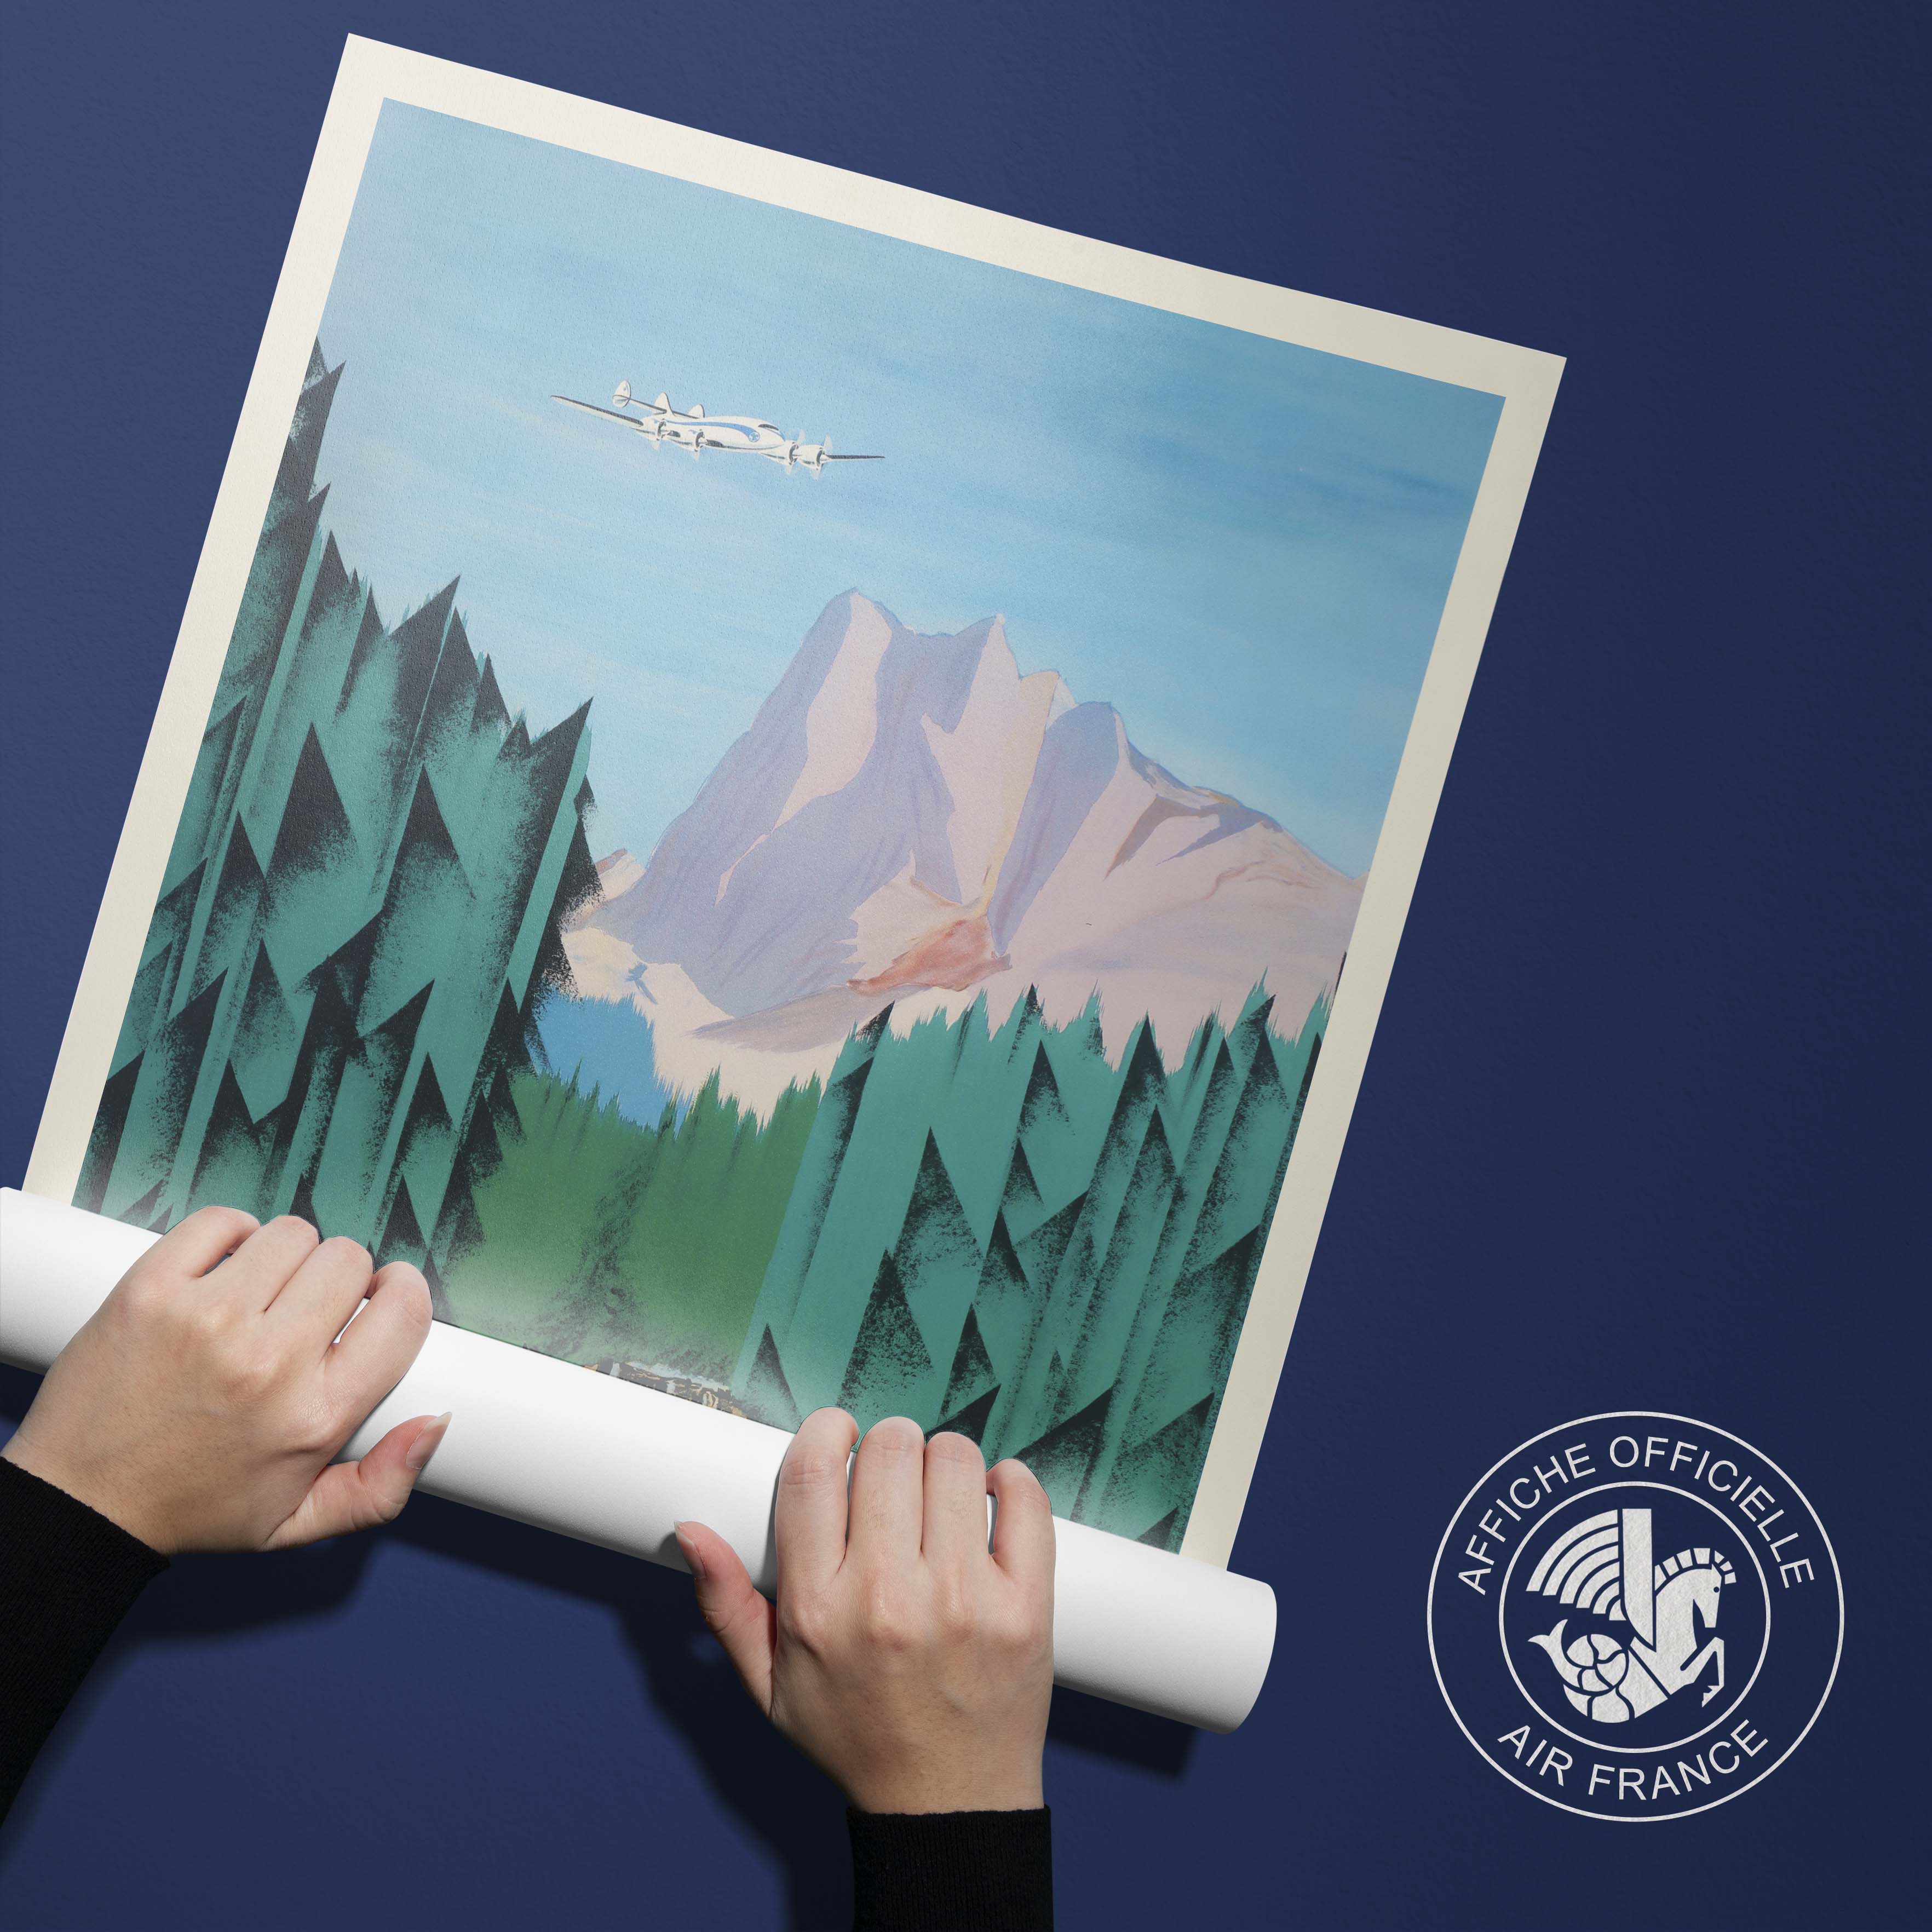 Affiche d'agence Air France - Canada-oneart.fr